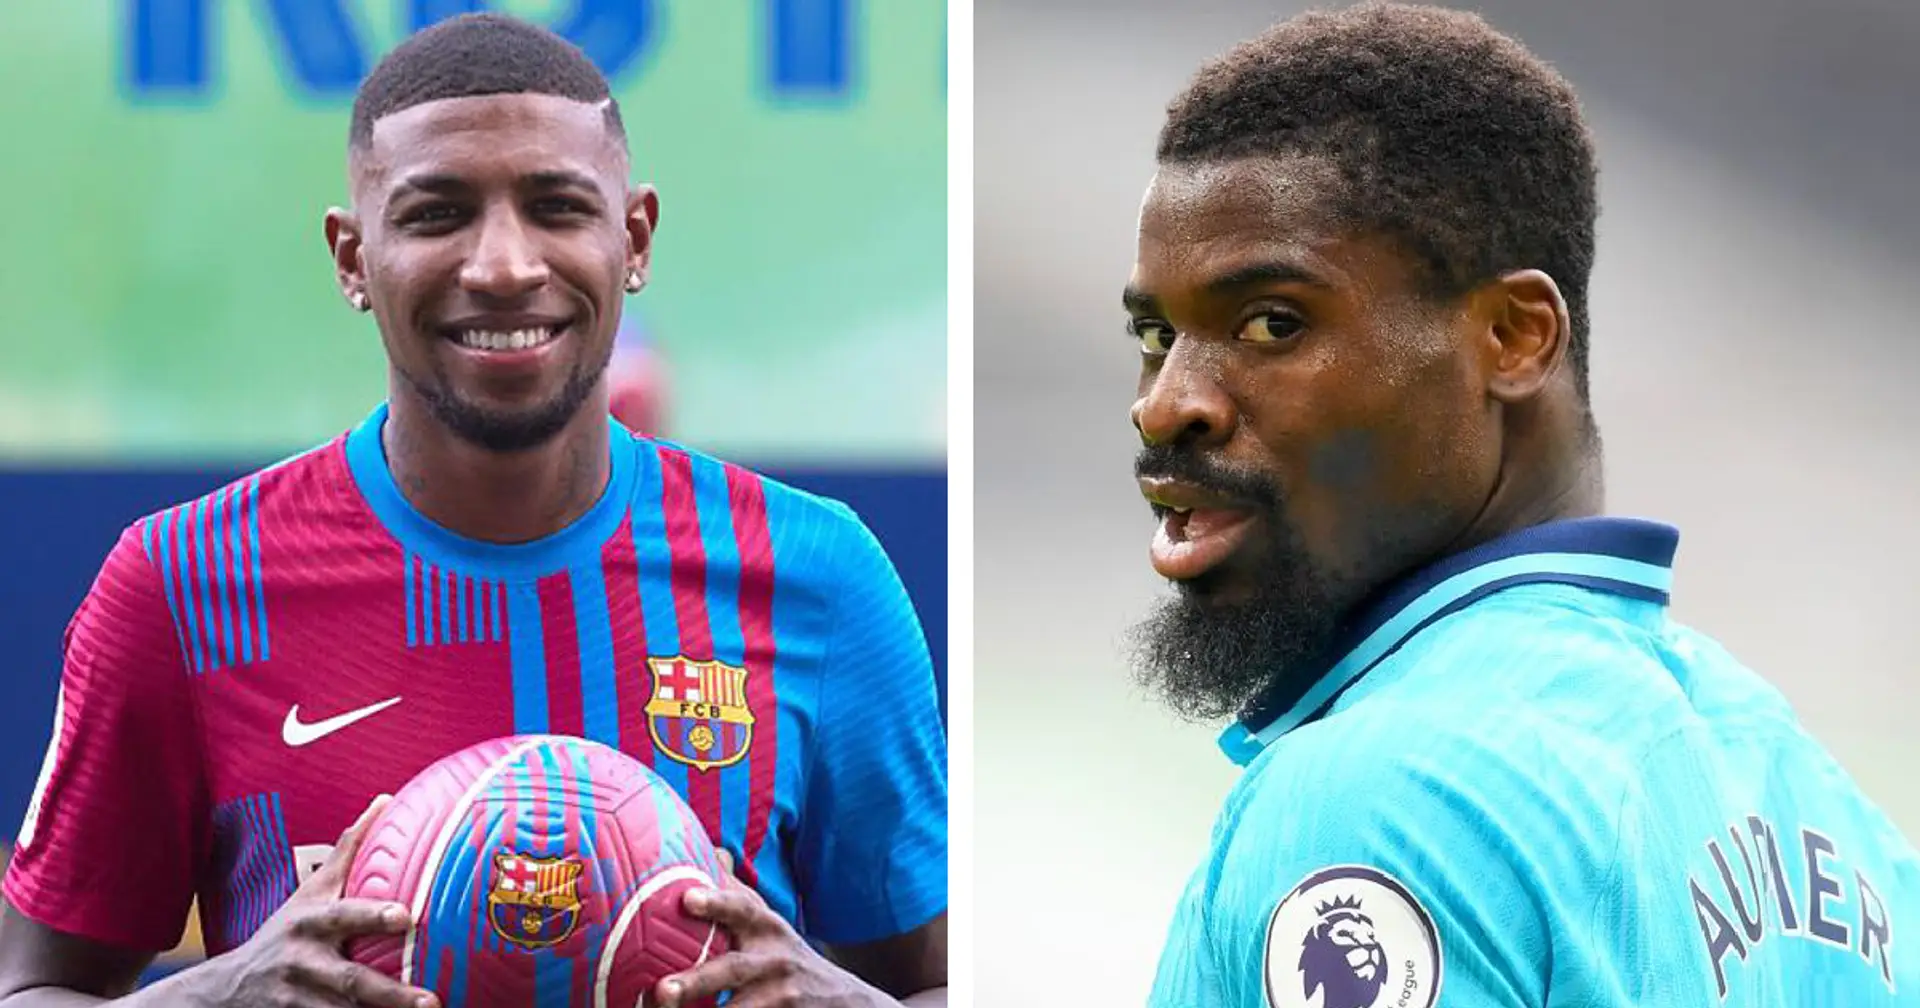 Tottenham offer Serge Aurier to Barcelona in swap deal for Emerson, Barca respond swiftly (reliability: 5 stars)